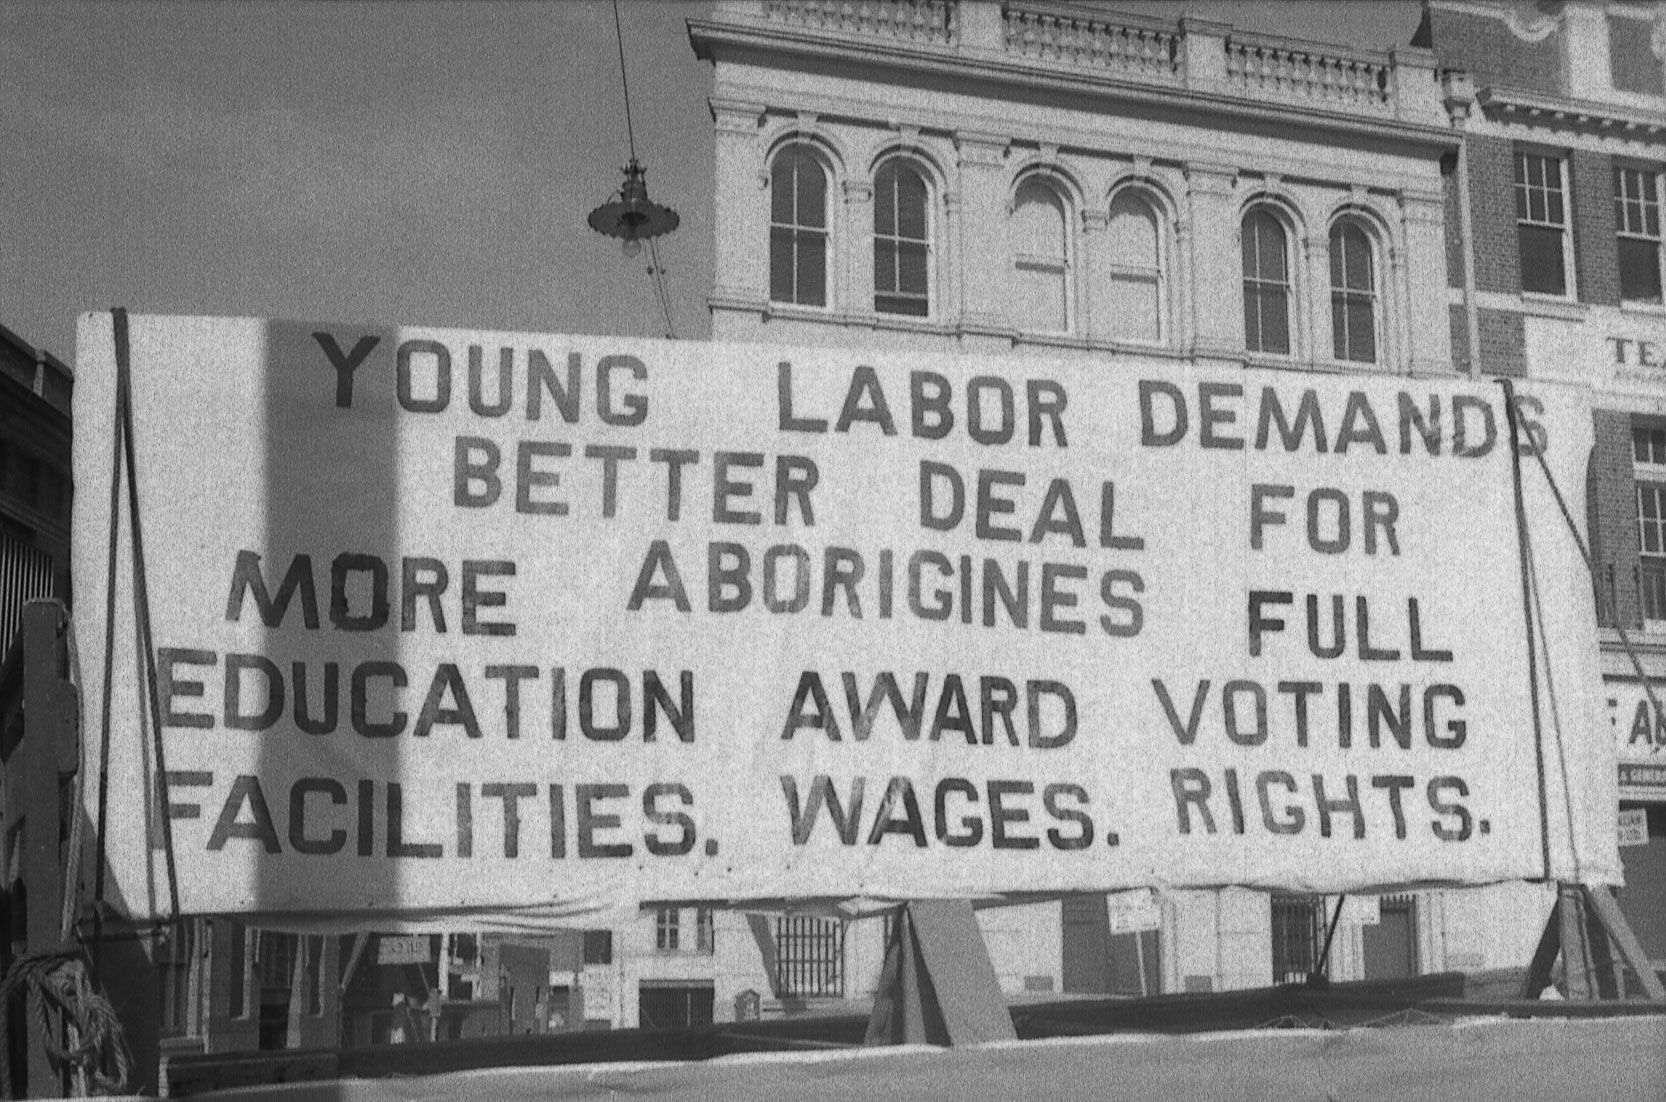 Young Labor banner on Aboriginal rights, May Day procession, 1965.